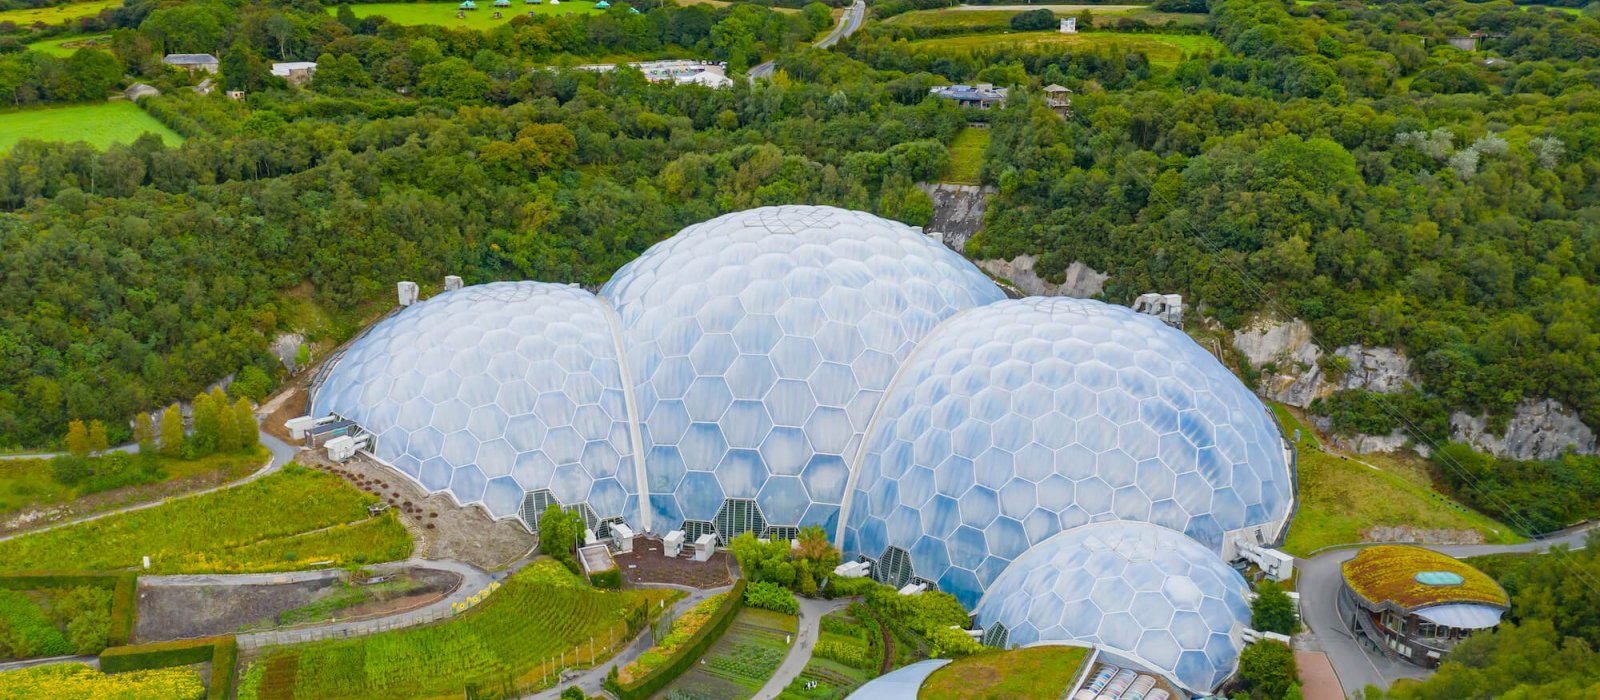 Aerial view of the Eden Project domes with fields and sky